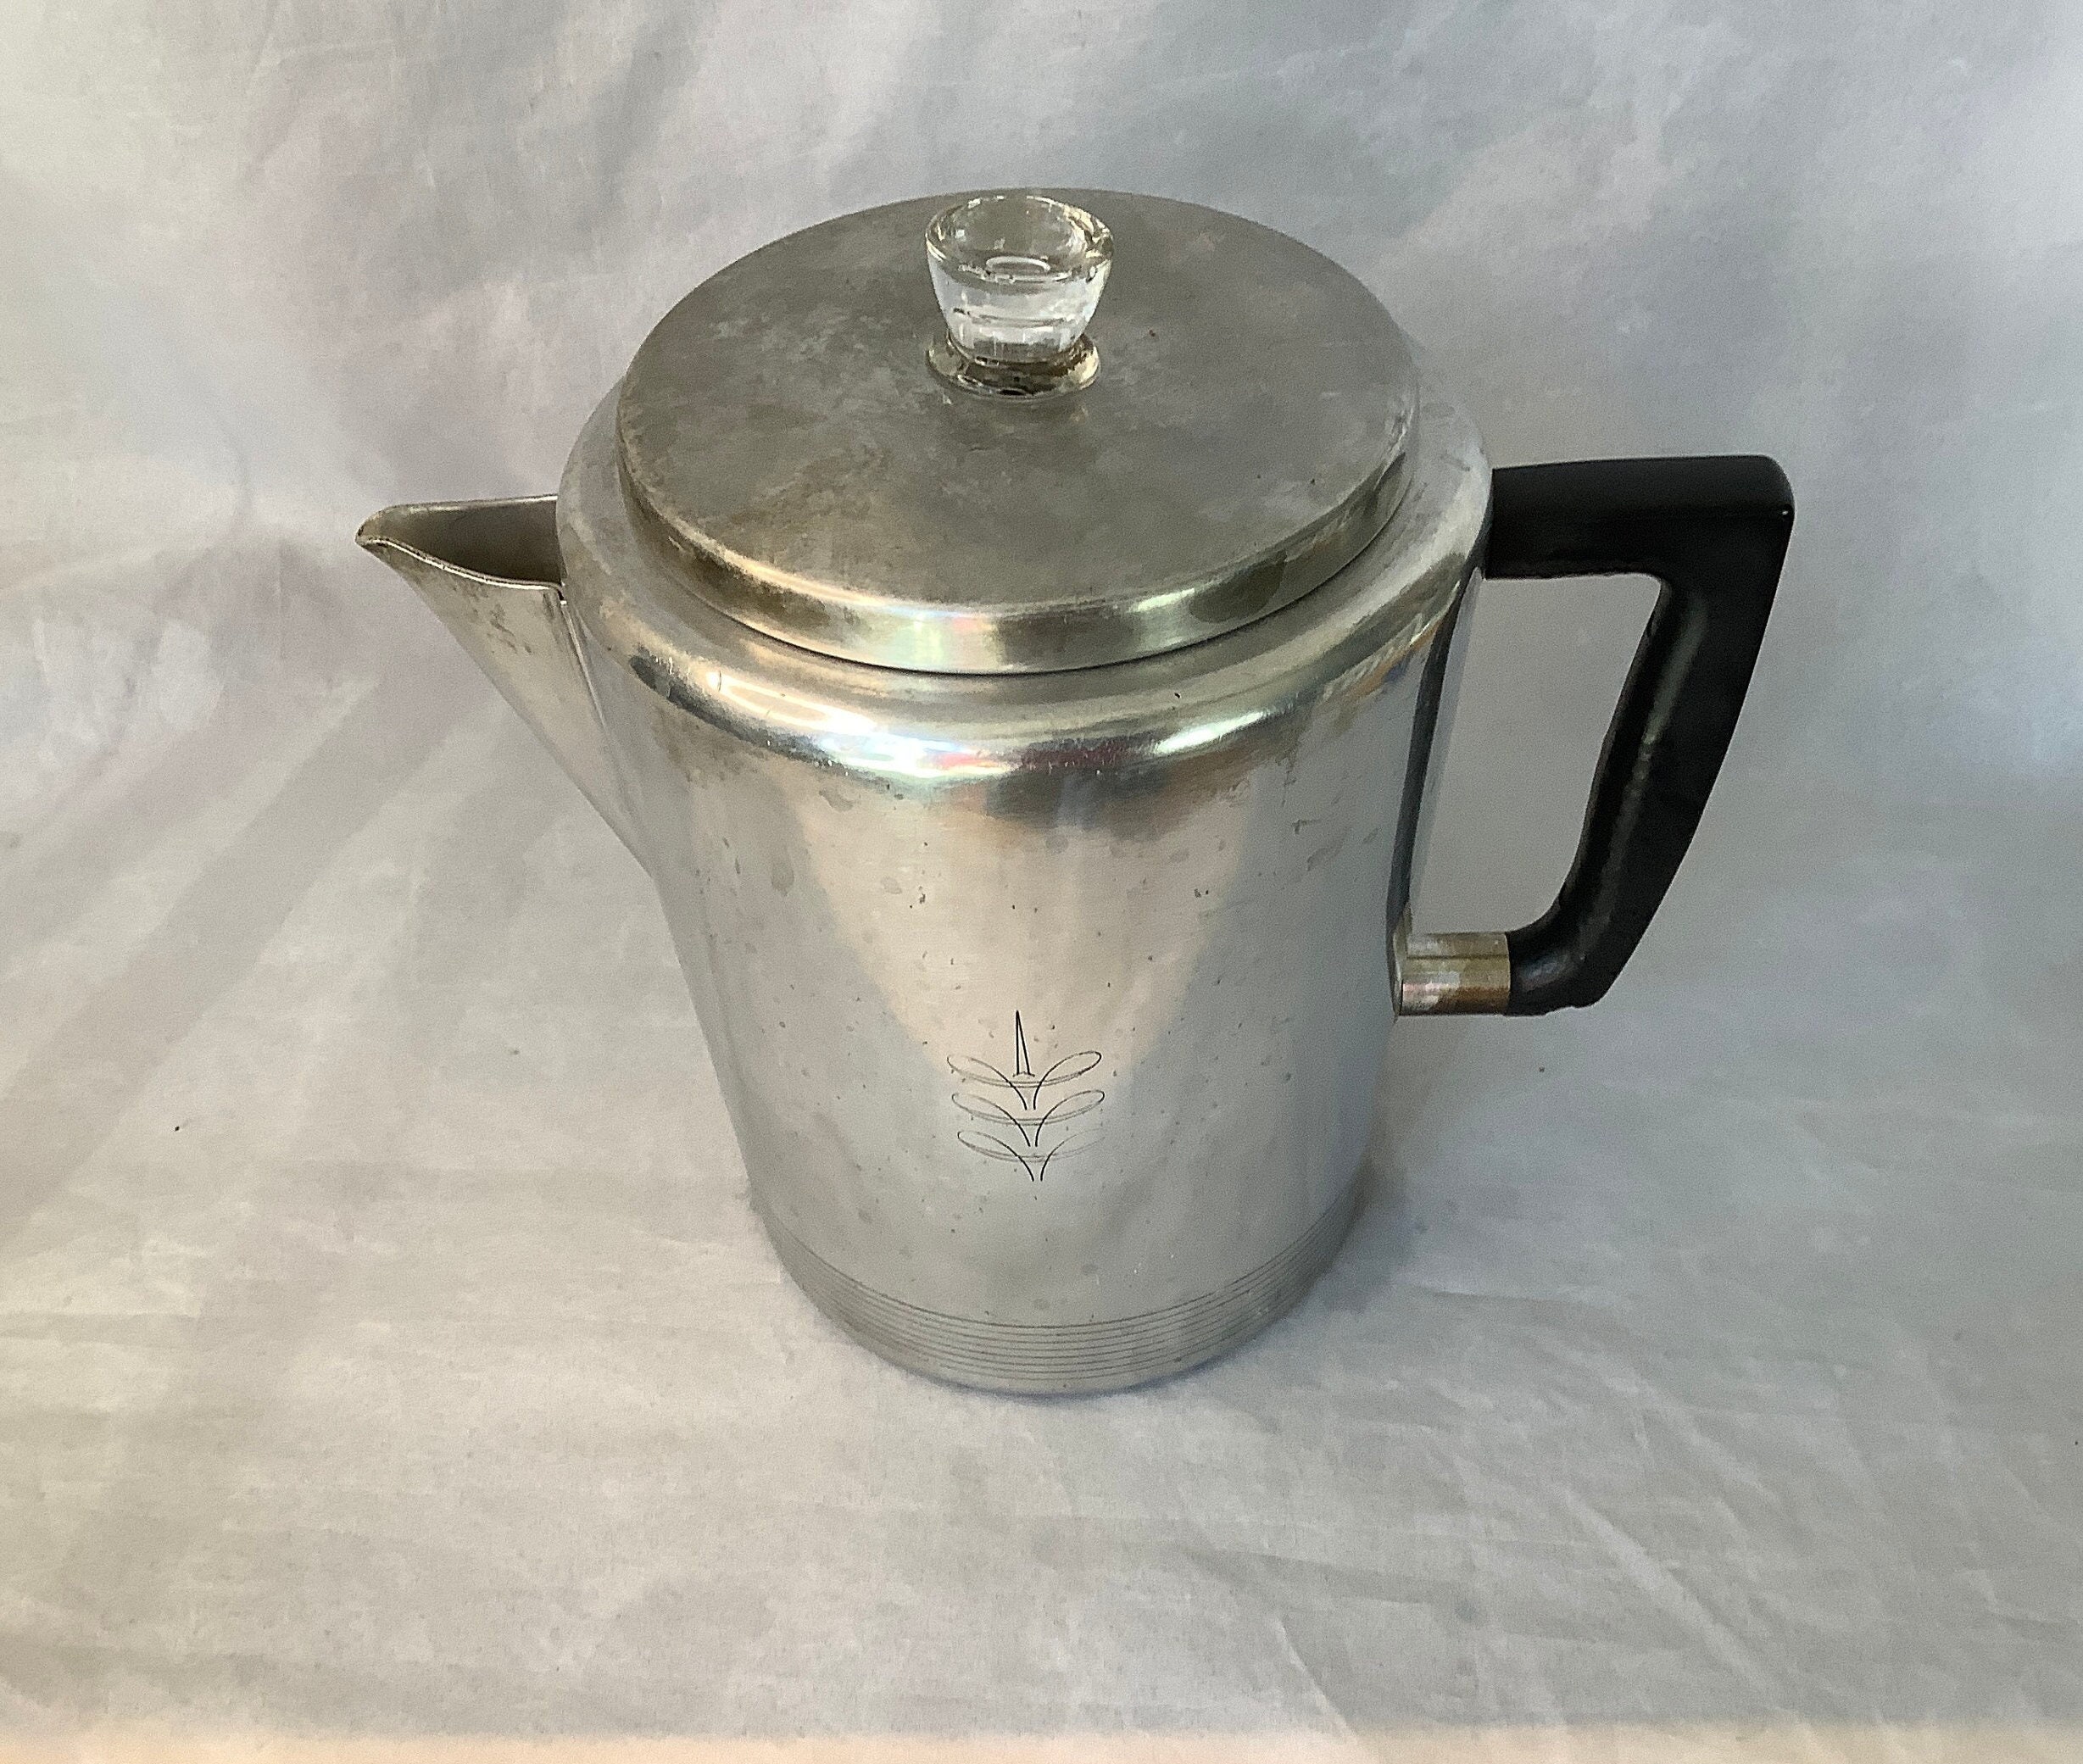 Presto Stainless Steel 2-12 Cup Electric Coffee Percolator Model # 0281105  Works